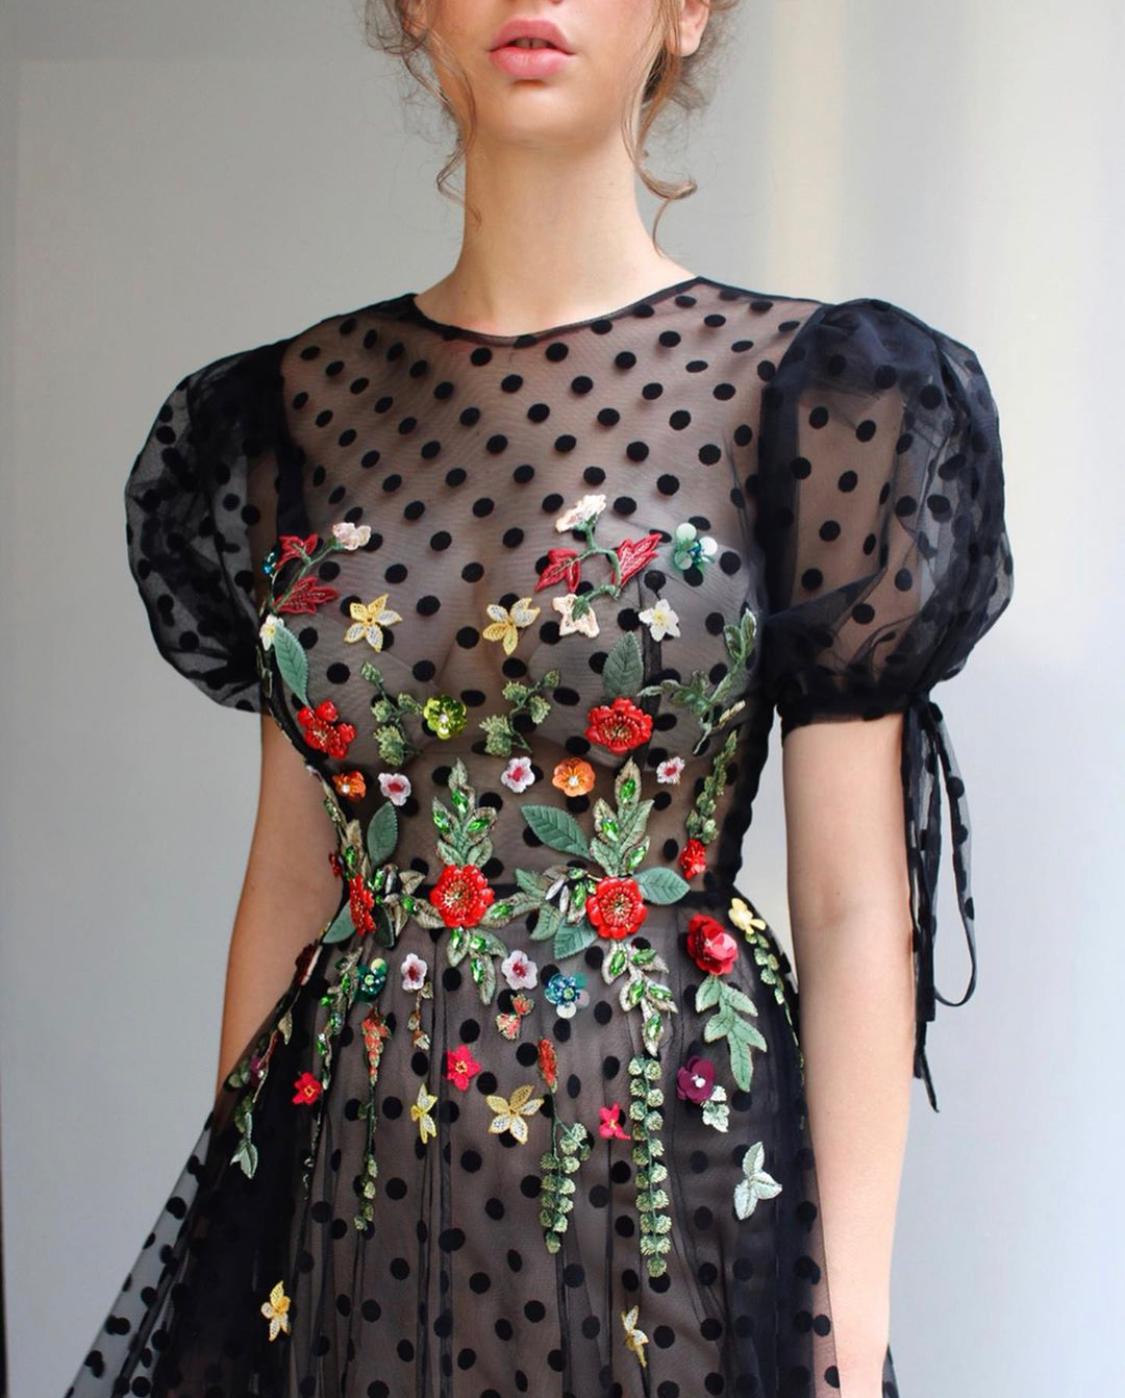 Black A-Line dress with dotted fabric, short sleeves and embroidery